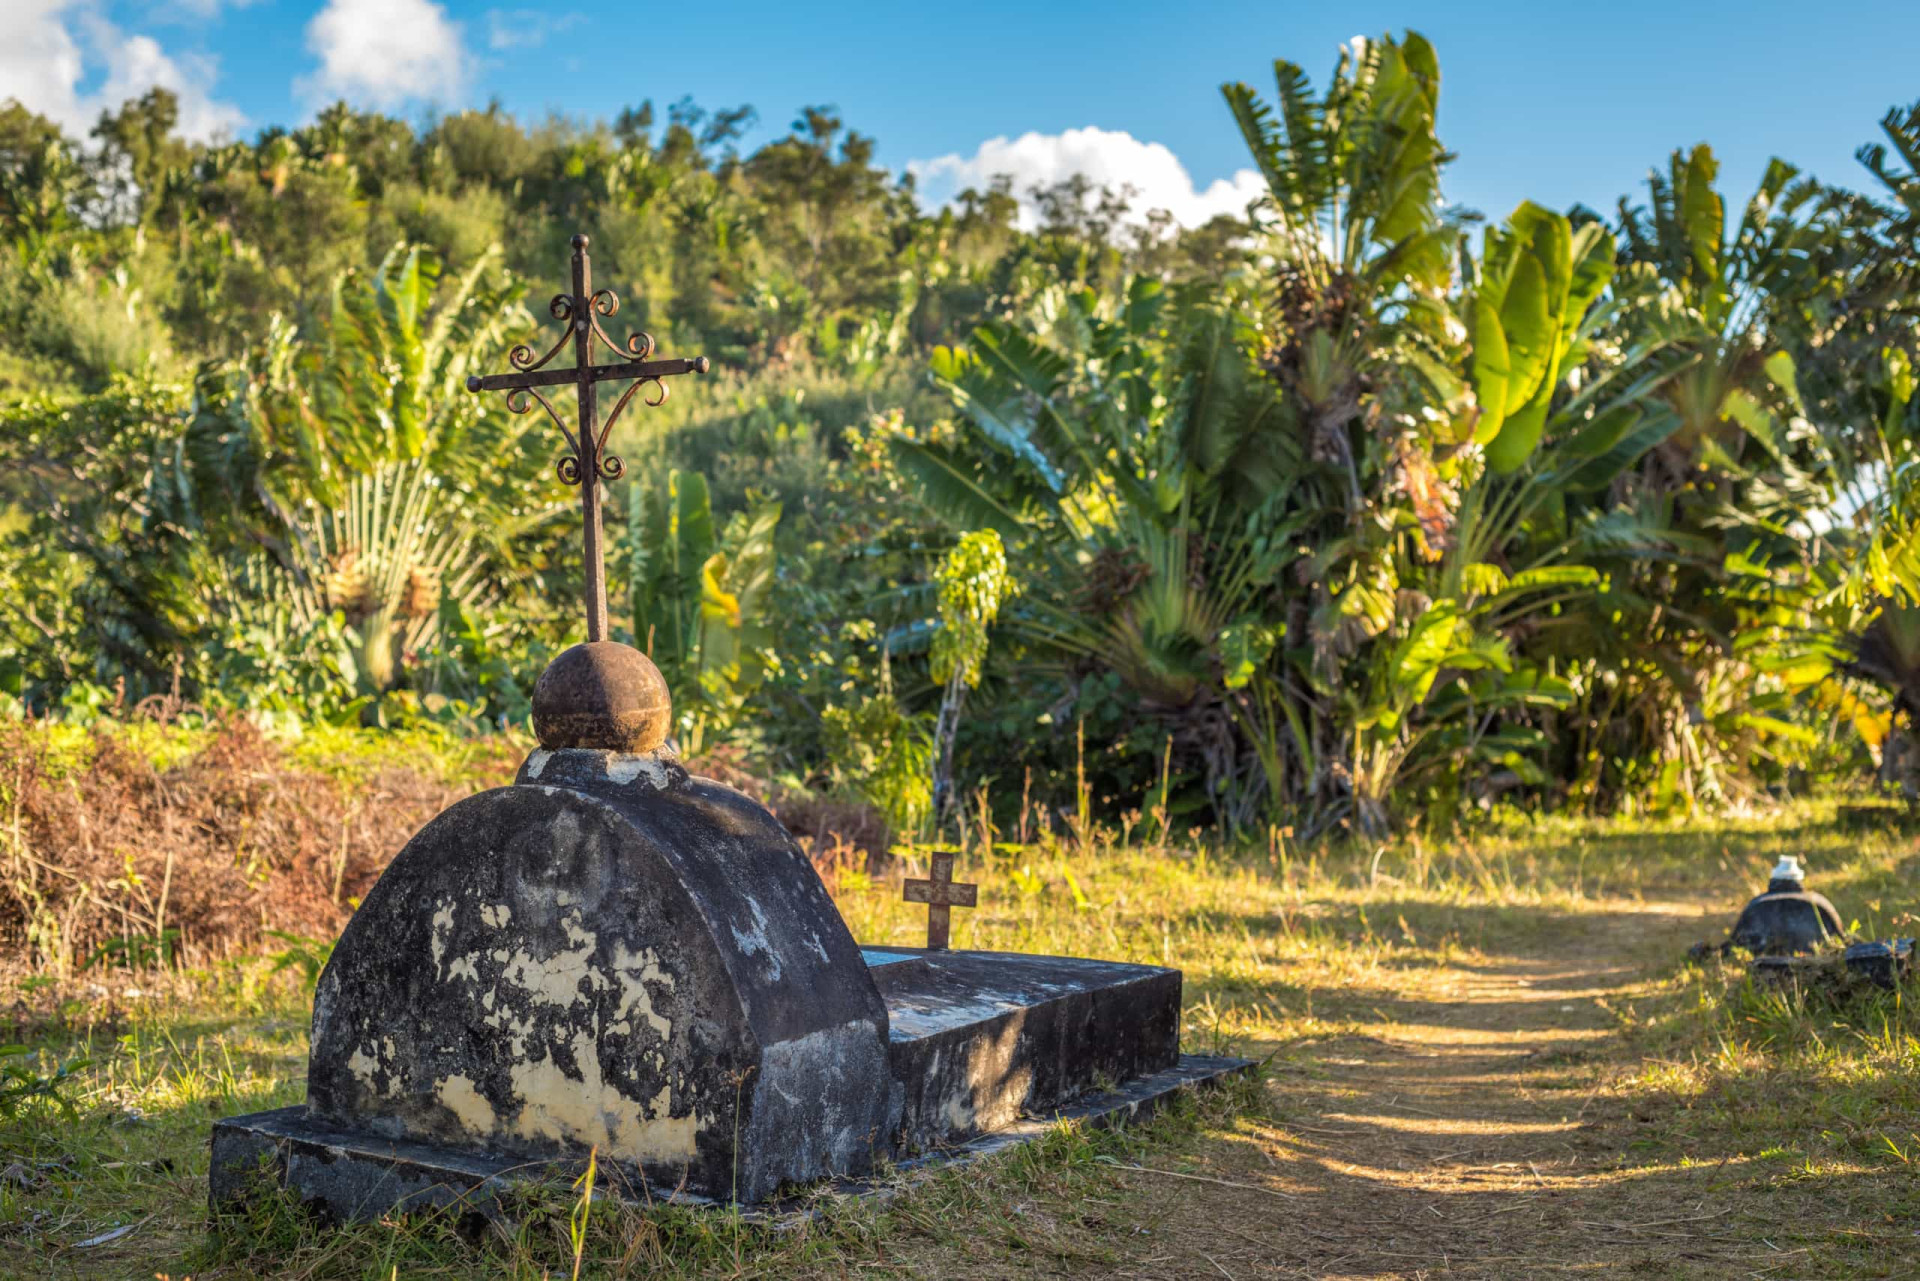 <p>The island was once a haven for pirates in the 17th and 18th centuries. Pictured is a pirates' cemetery.</p><p><a href="https://www.msn.com/en-us/community/channel/vid-7xx8mnucu55yw63we9va2gwr7uihbxwc68fxqp25x6tg4ftibpra?cvid=94631541bc0f4f89bfd59158d696ad7e">Follow us and access great exclusive content every day</a></p>